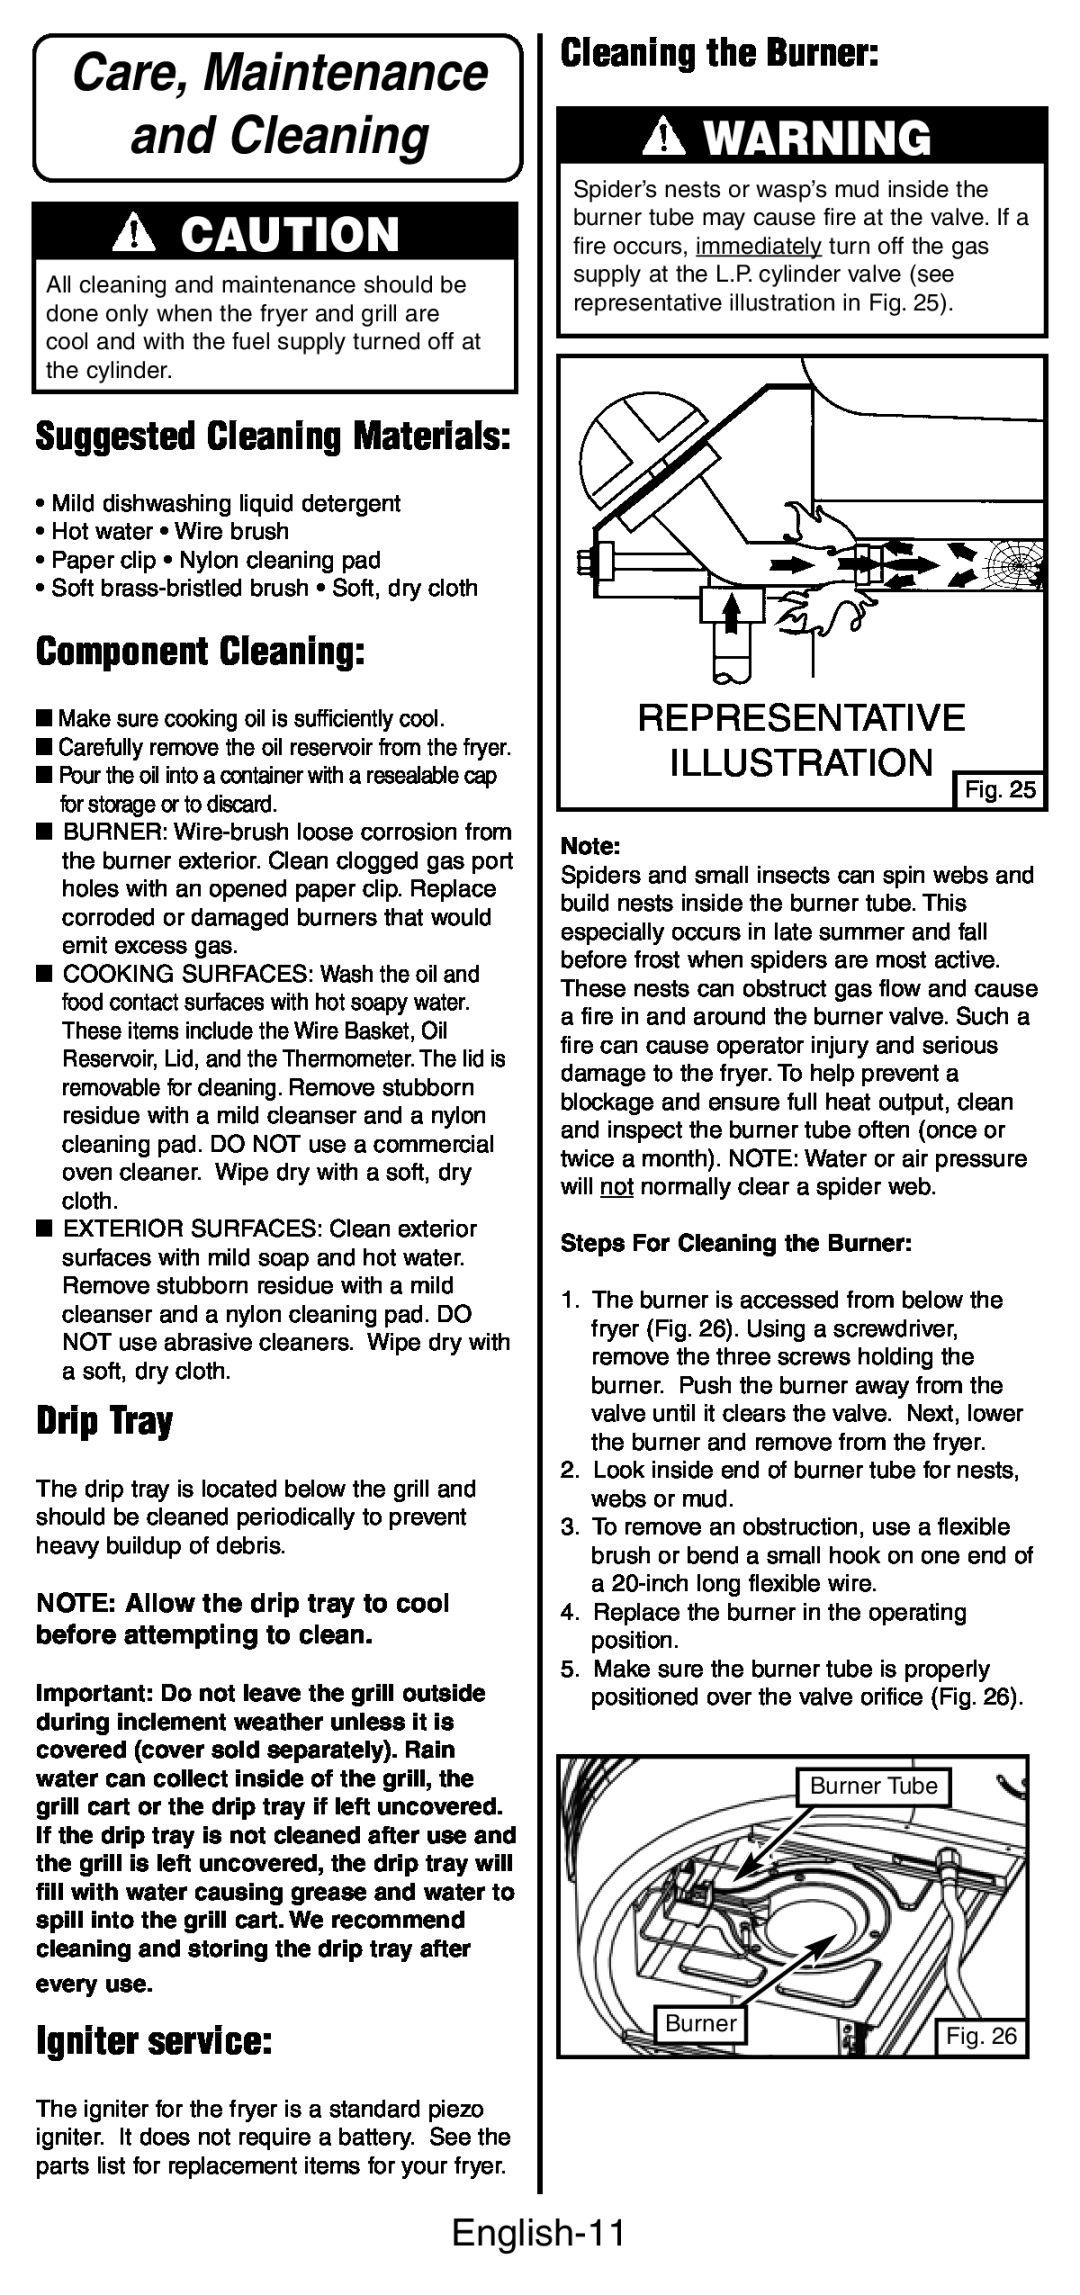 Coleman 9994 and Cleaning, Care, Maintenance, Representative Illustration, English-11, Suggested Cleaning Materials 